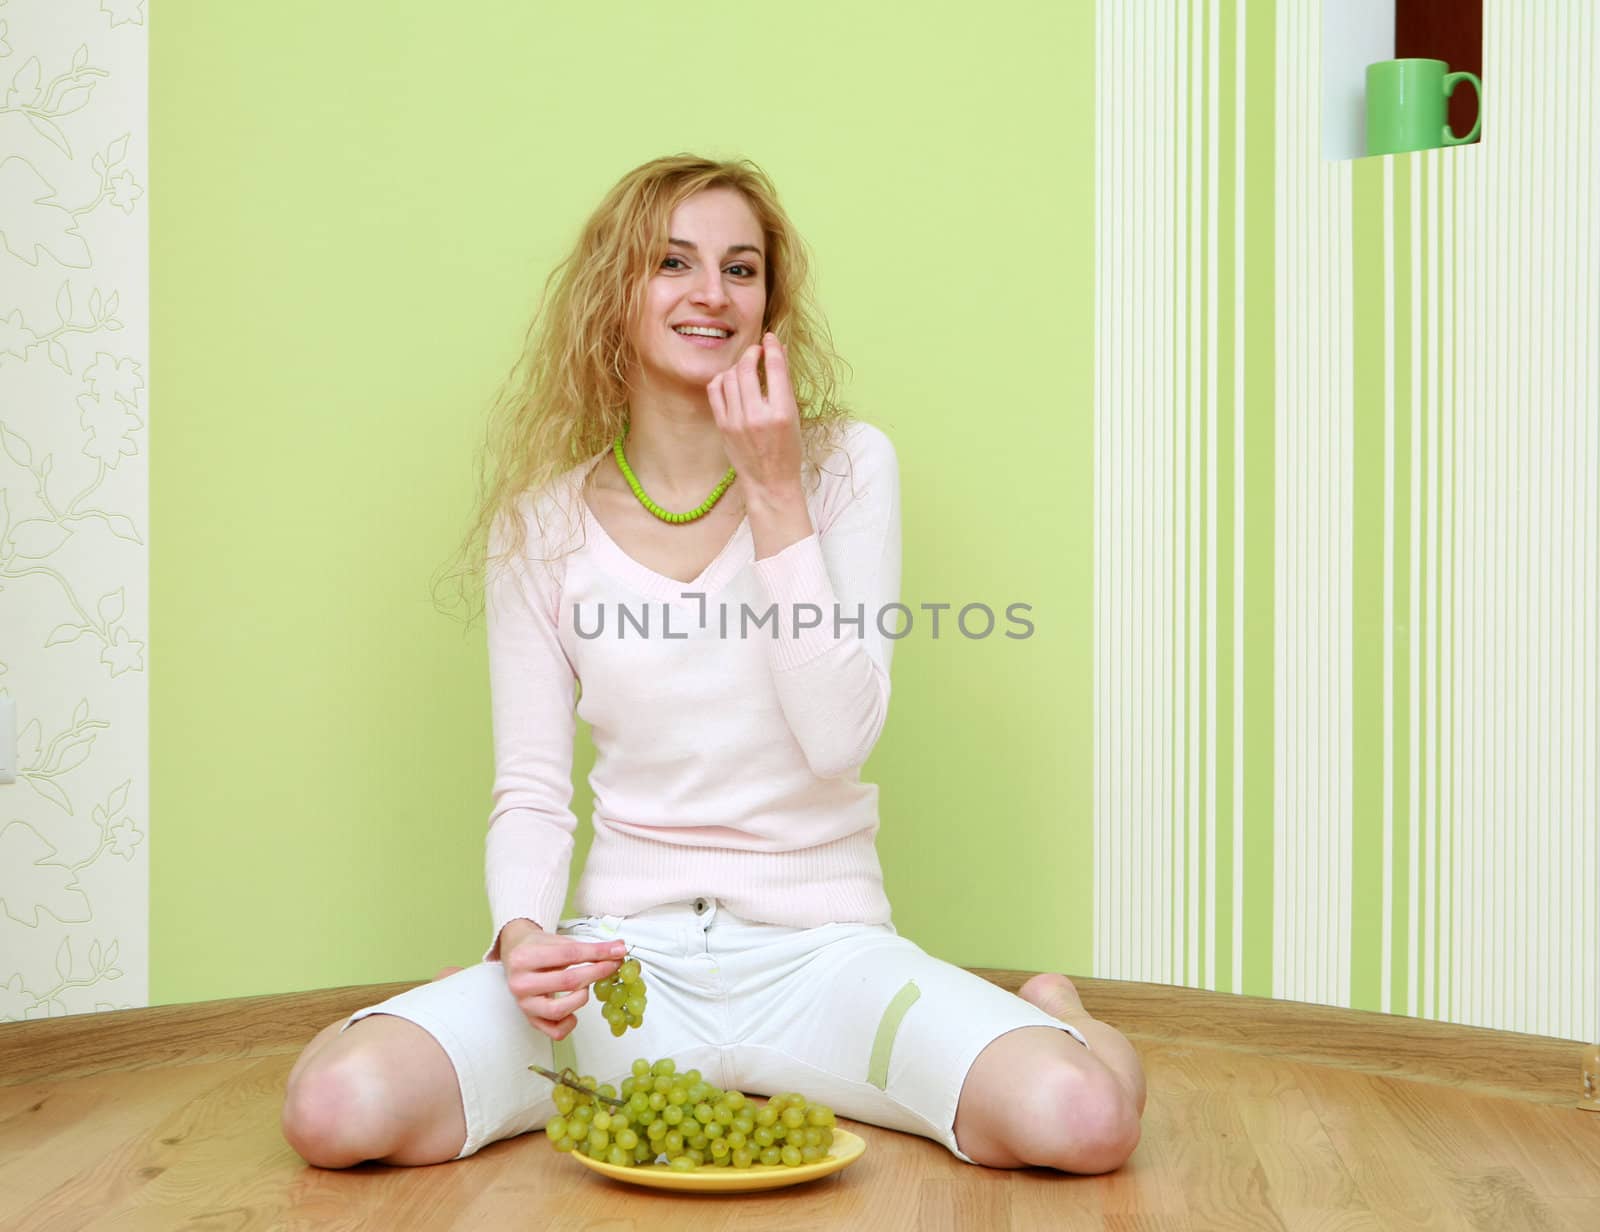 An image of a girl with a bunch of green grapes on plate